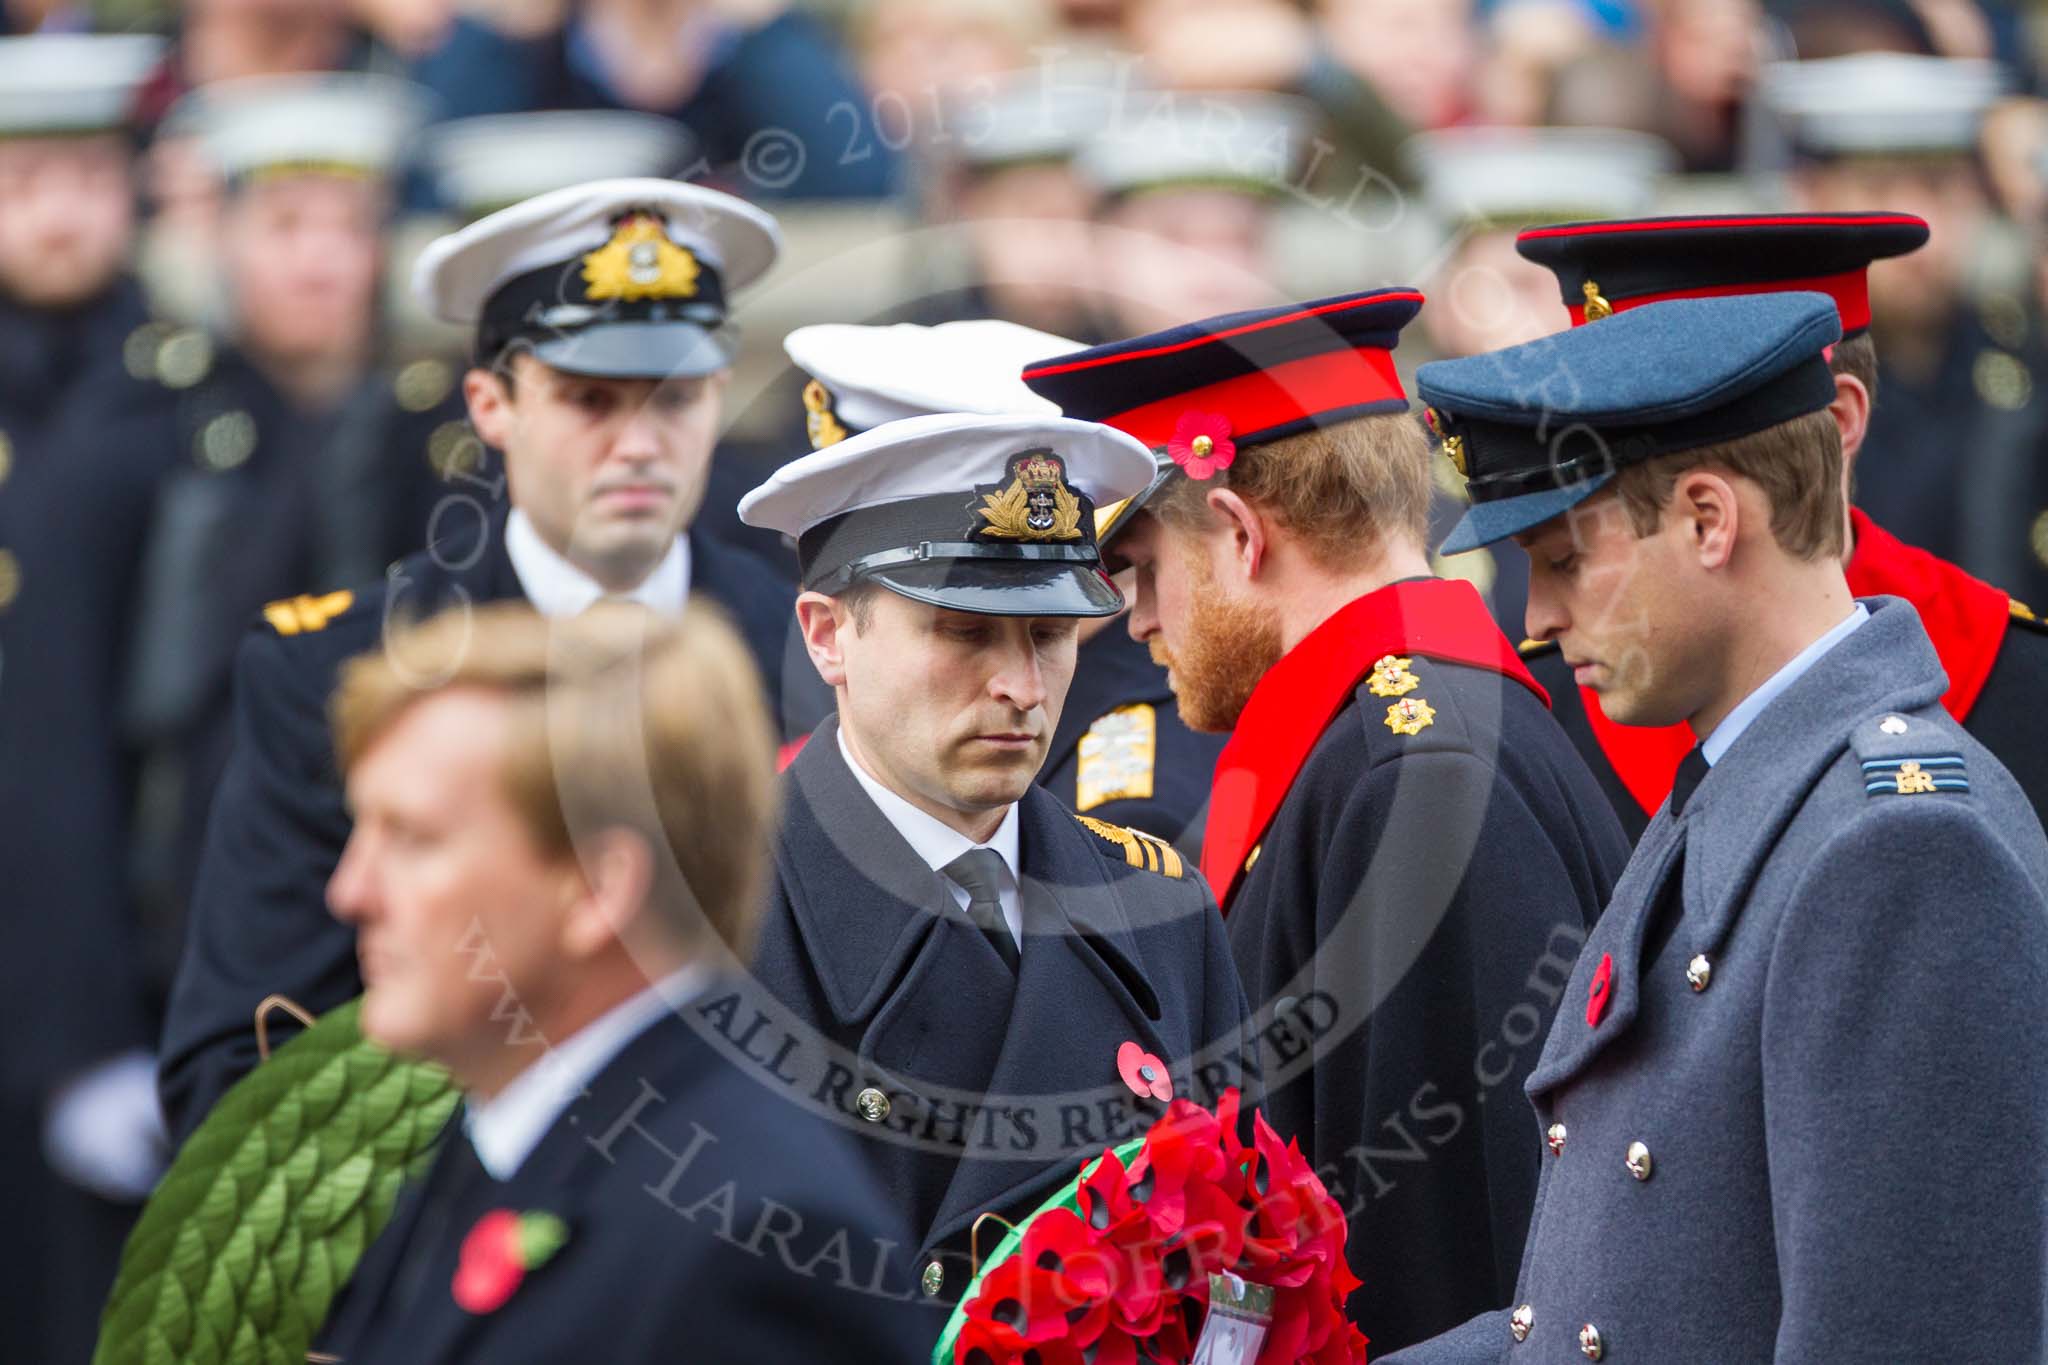 Remembrance Sunday at the Cenotaph 2015: The Equerry to HRH The Duke of Cambridge,  Lieutenant  Commander  James  Benbow, Royal Navy, handing over the wreath to Prince William. Behind them, Captain  Edward  Lane  Fox, Equerry to HRH Prince Henry of Wales, is handing over the wreath to Prince Harry. Image #189, 08 November 2015 11:05 Whitehall, London, UK